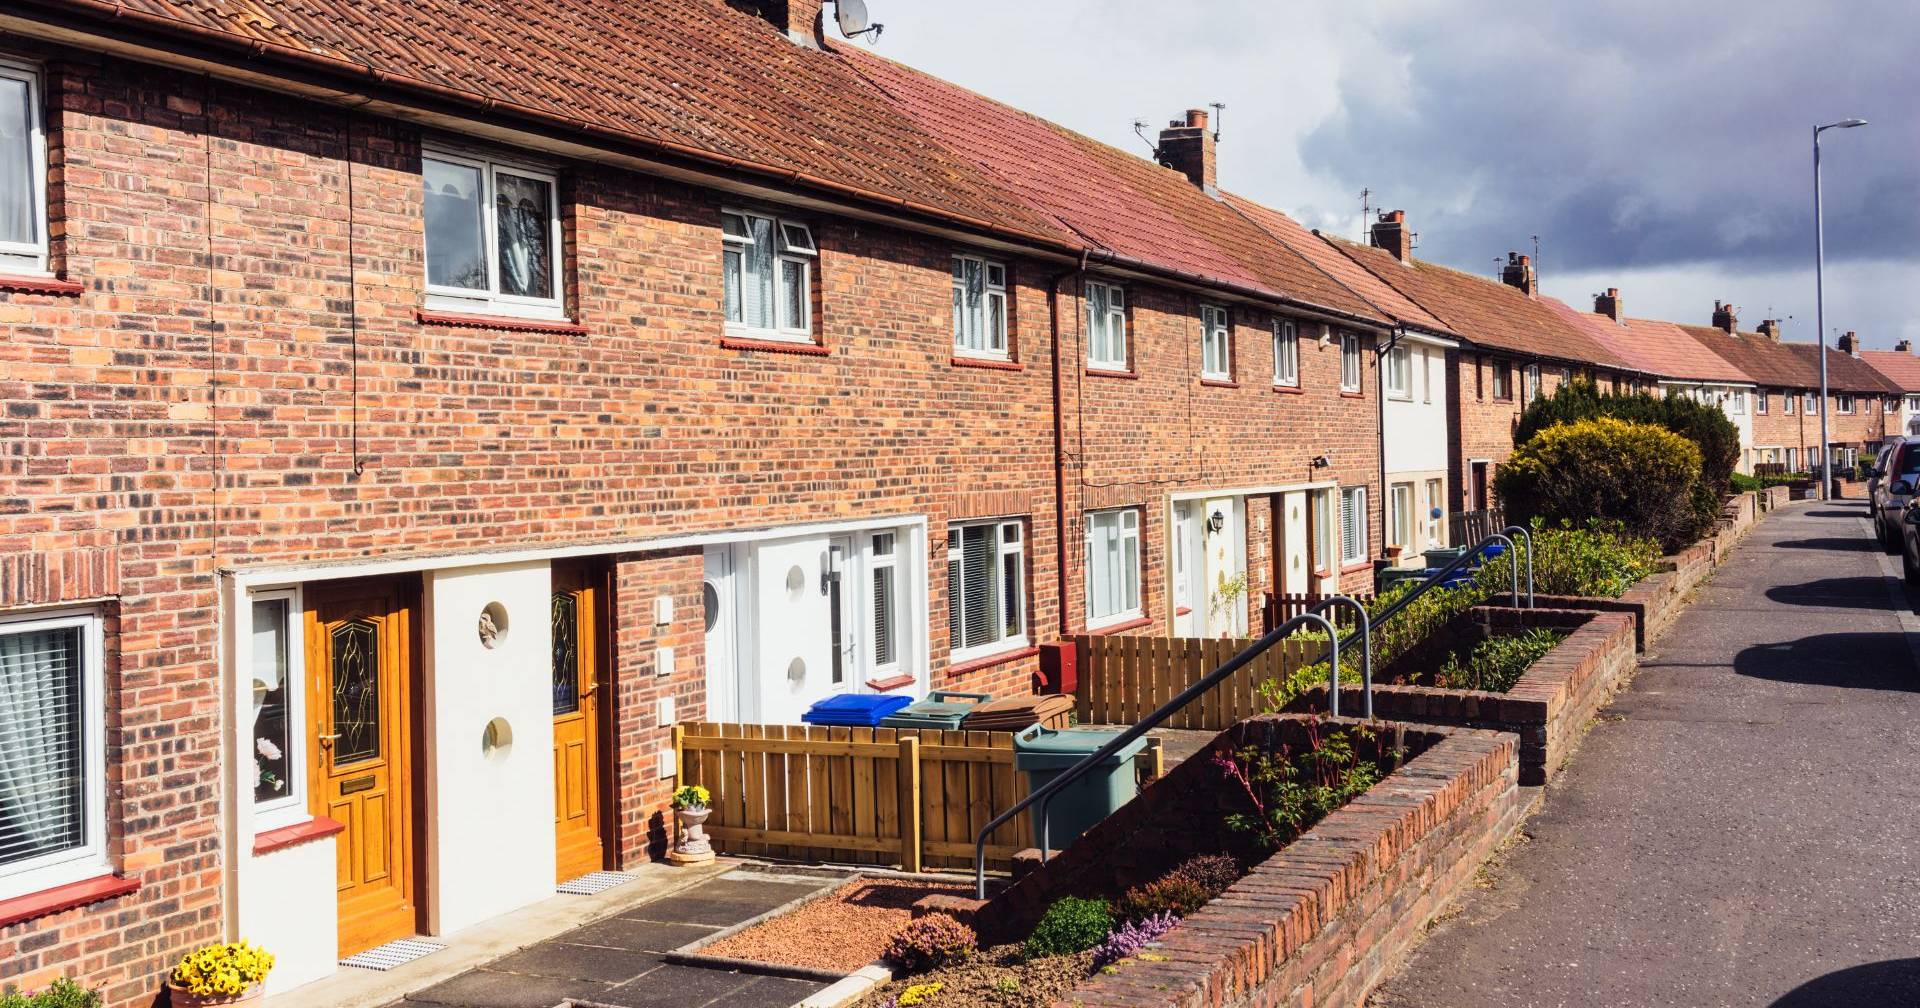 Buying or renting a house in the UK is difficult